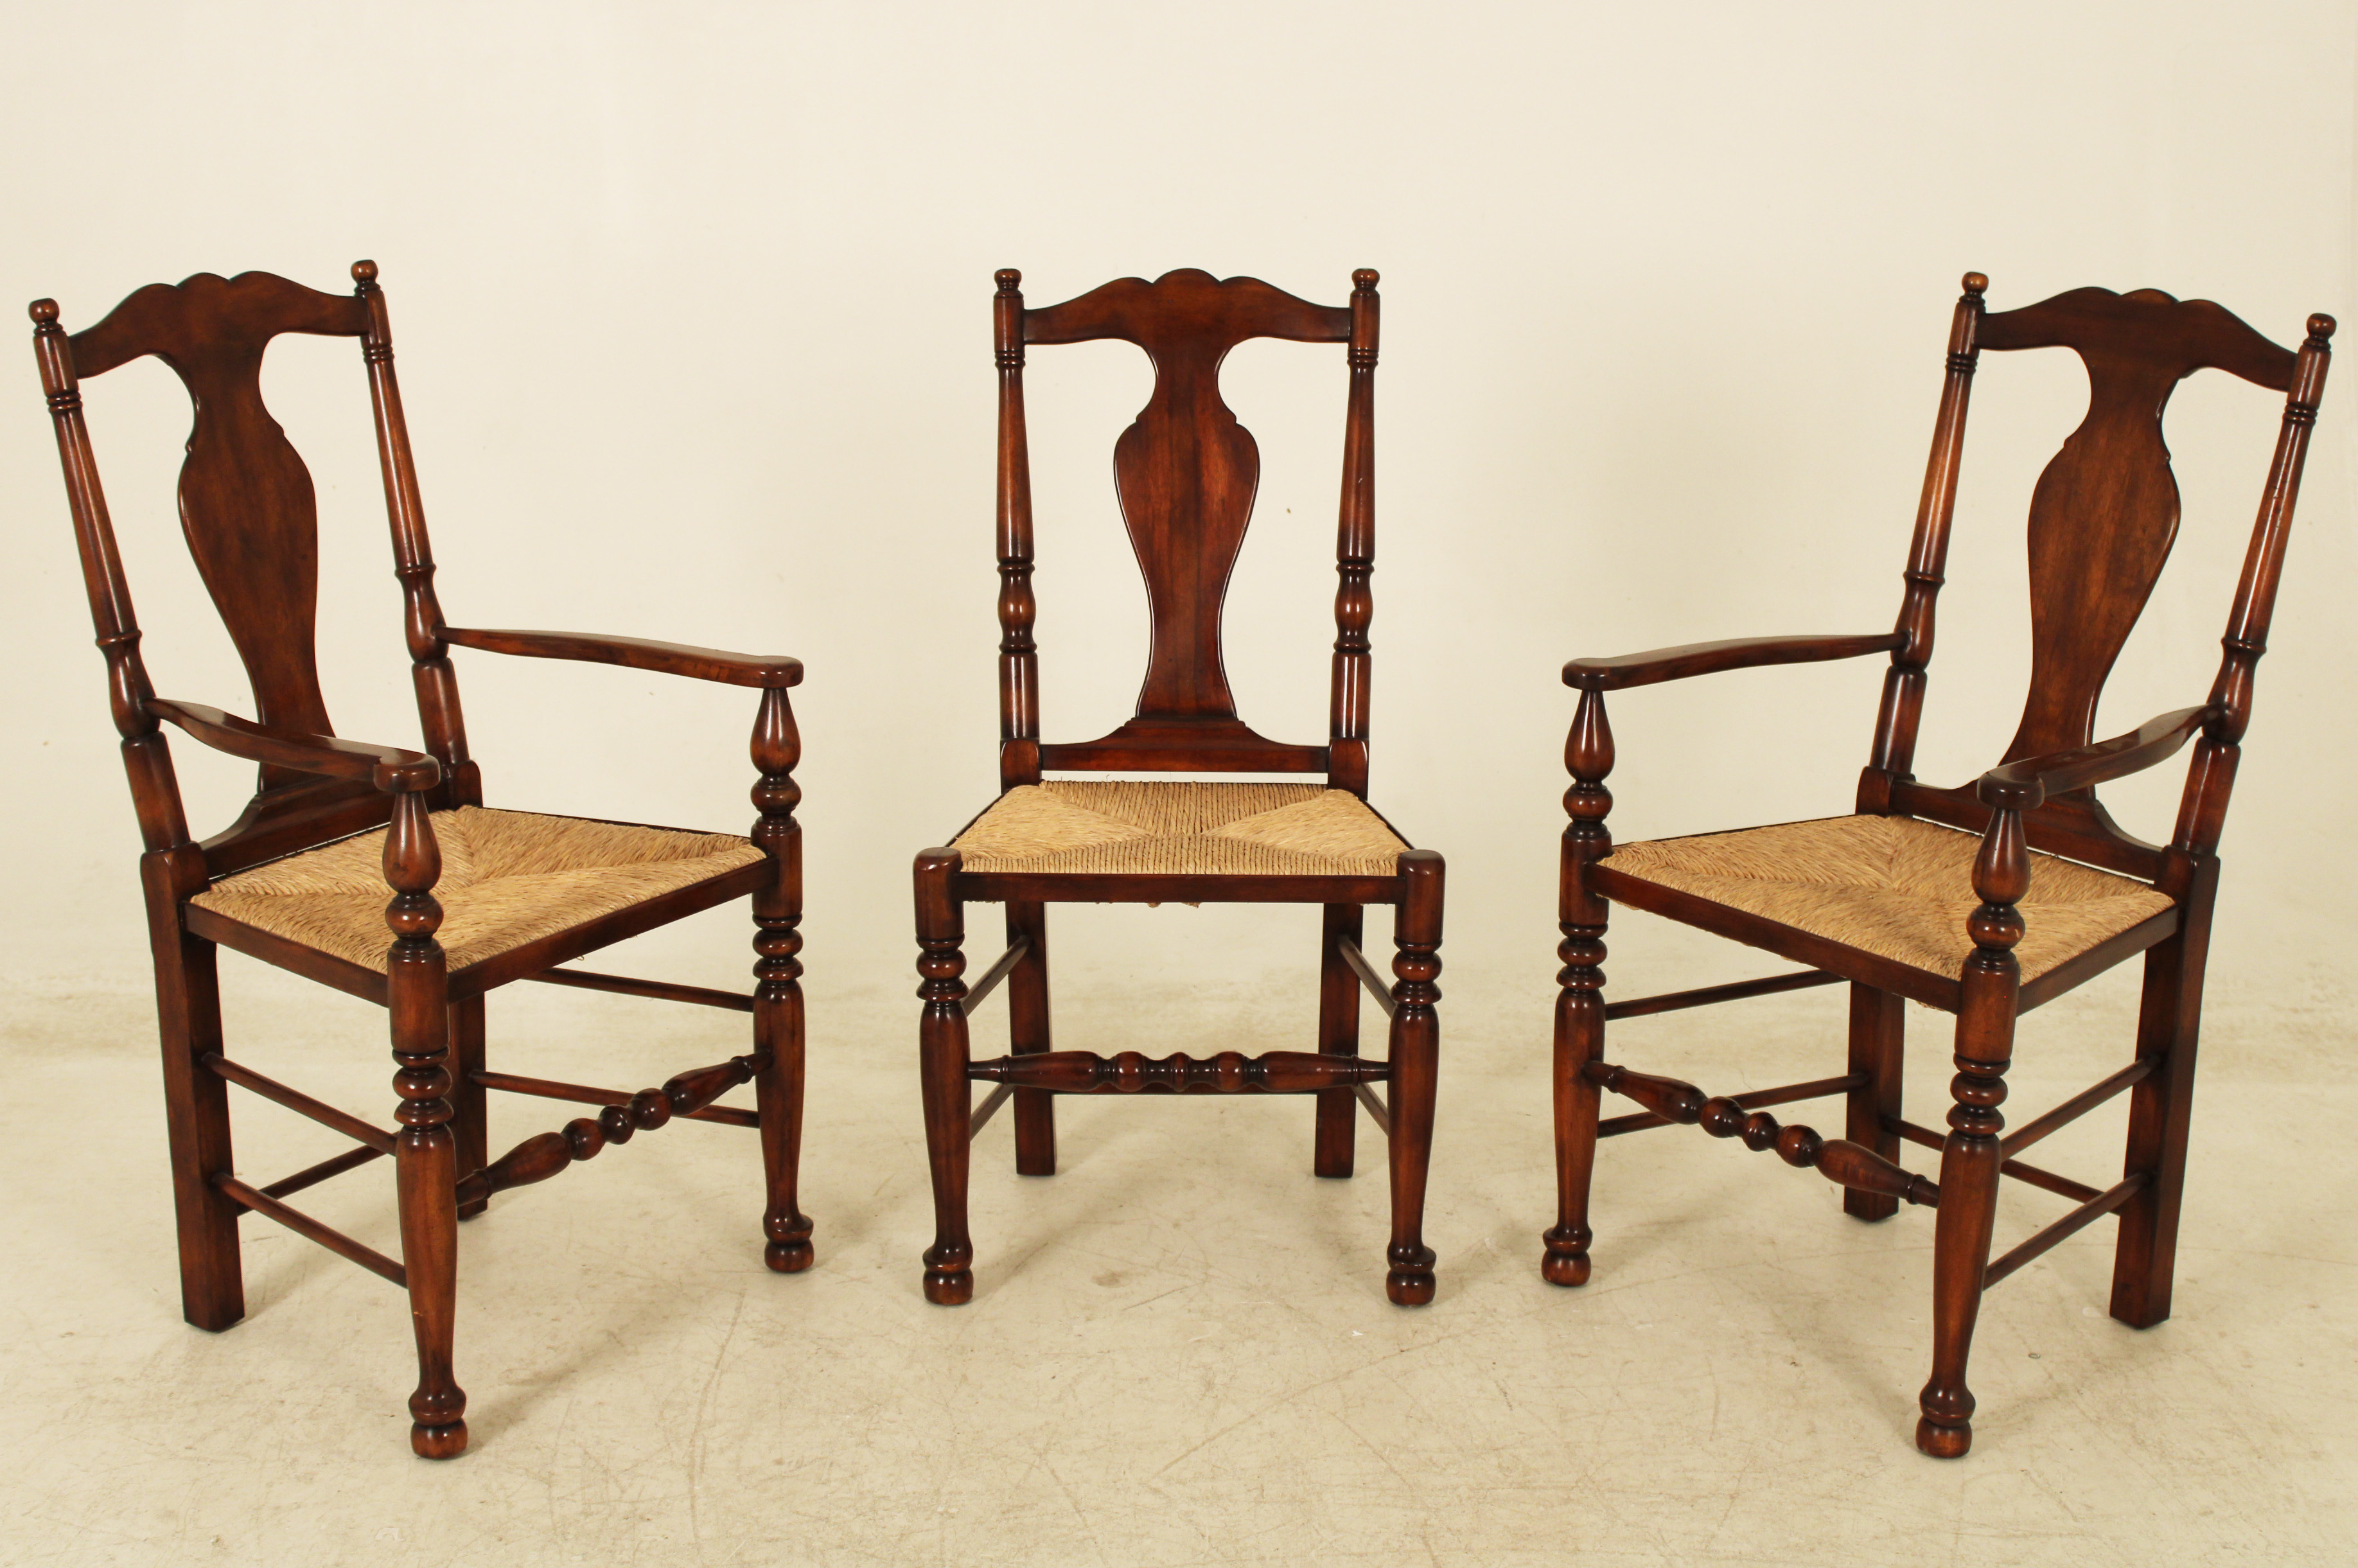 8 RUSH SEAT WALNUT CHAIRS BY THEODORE 35f62a